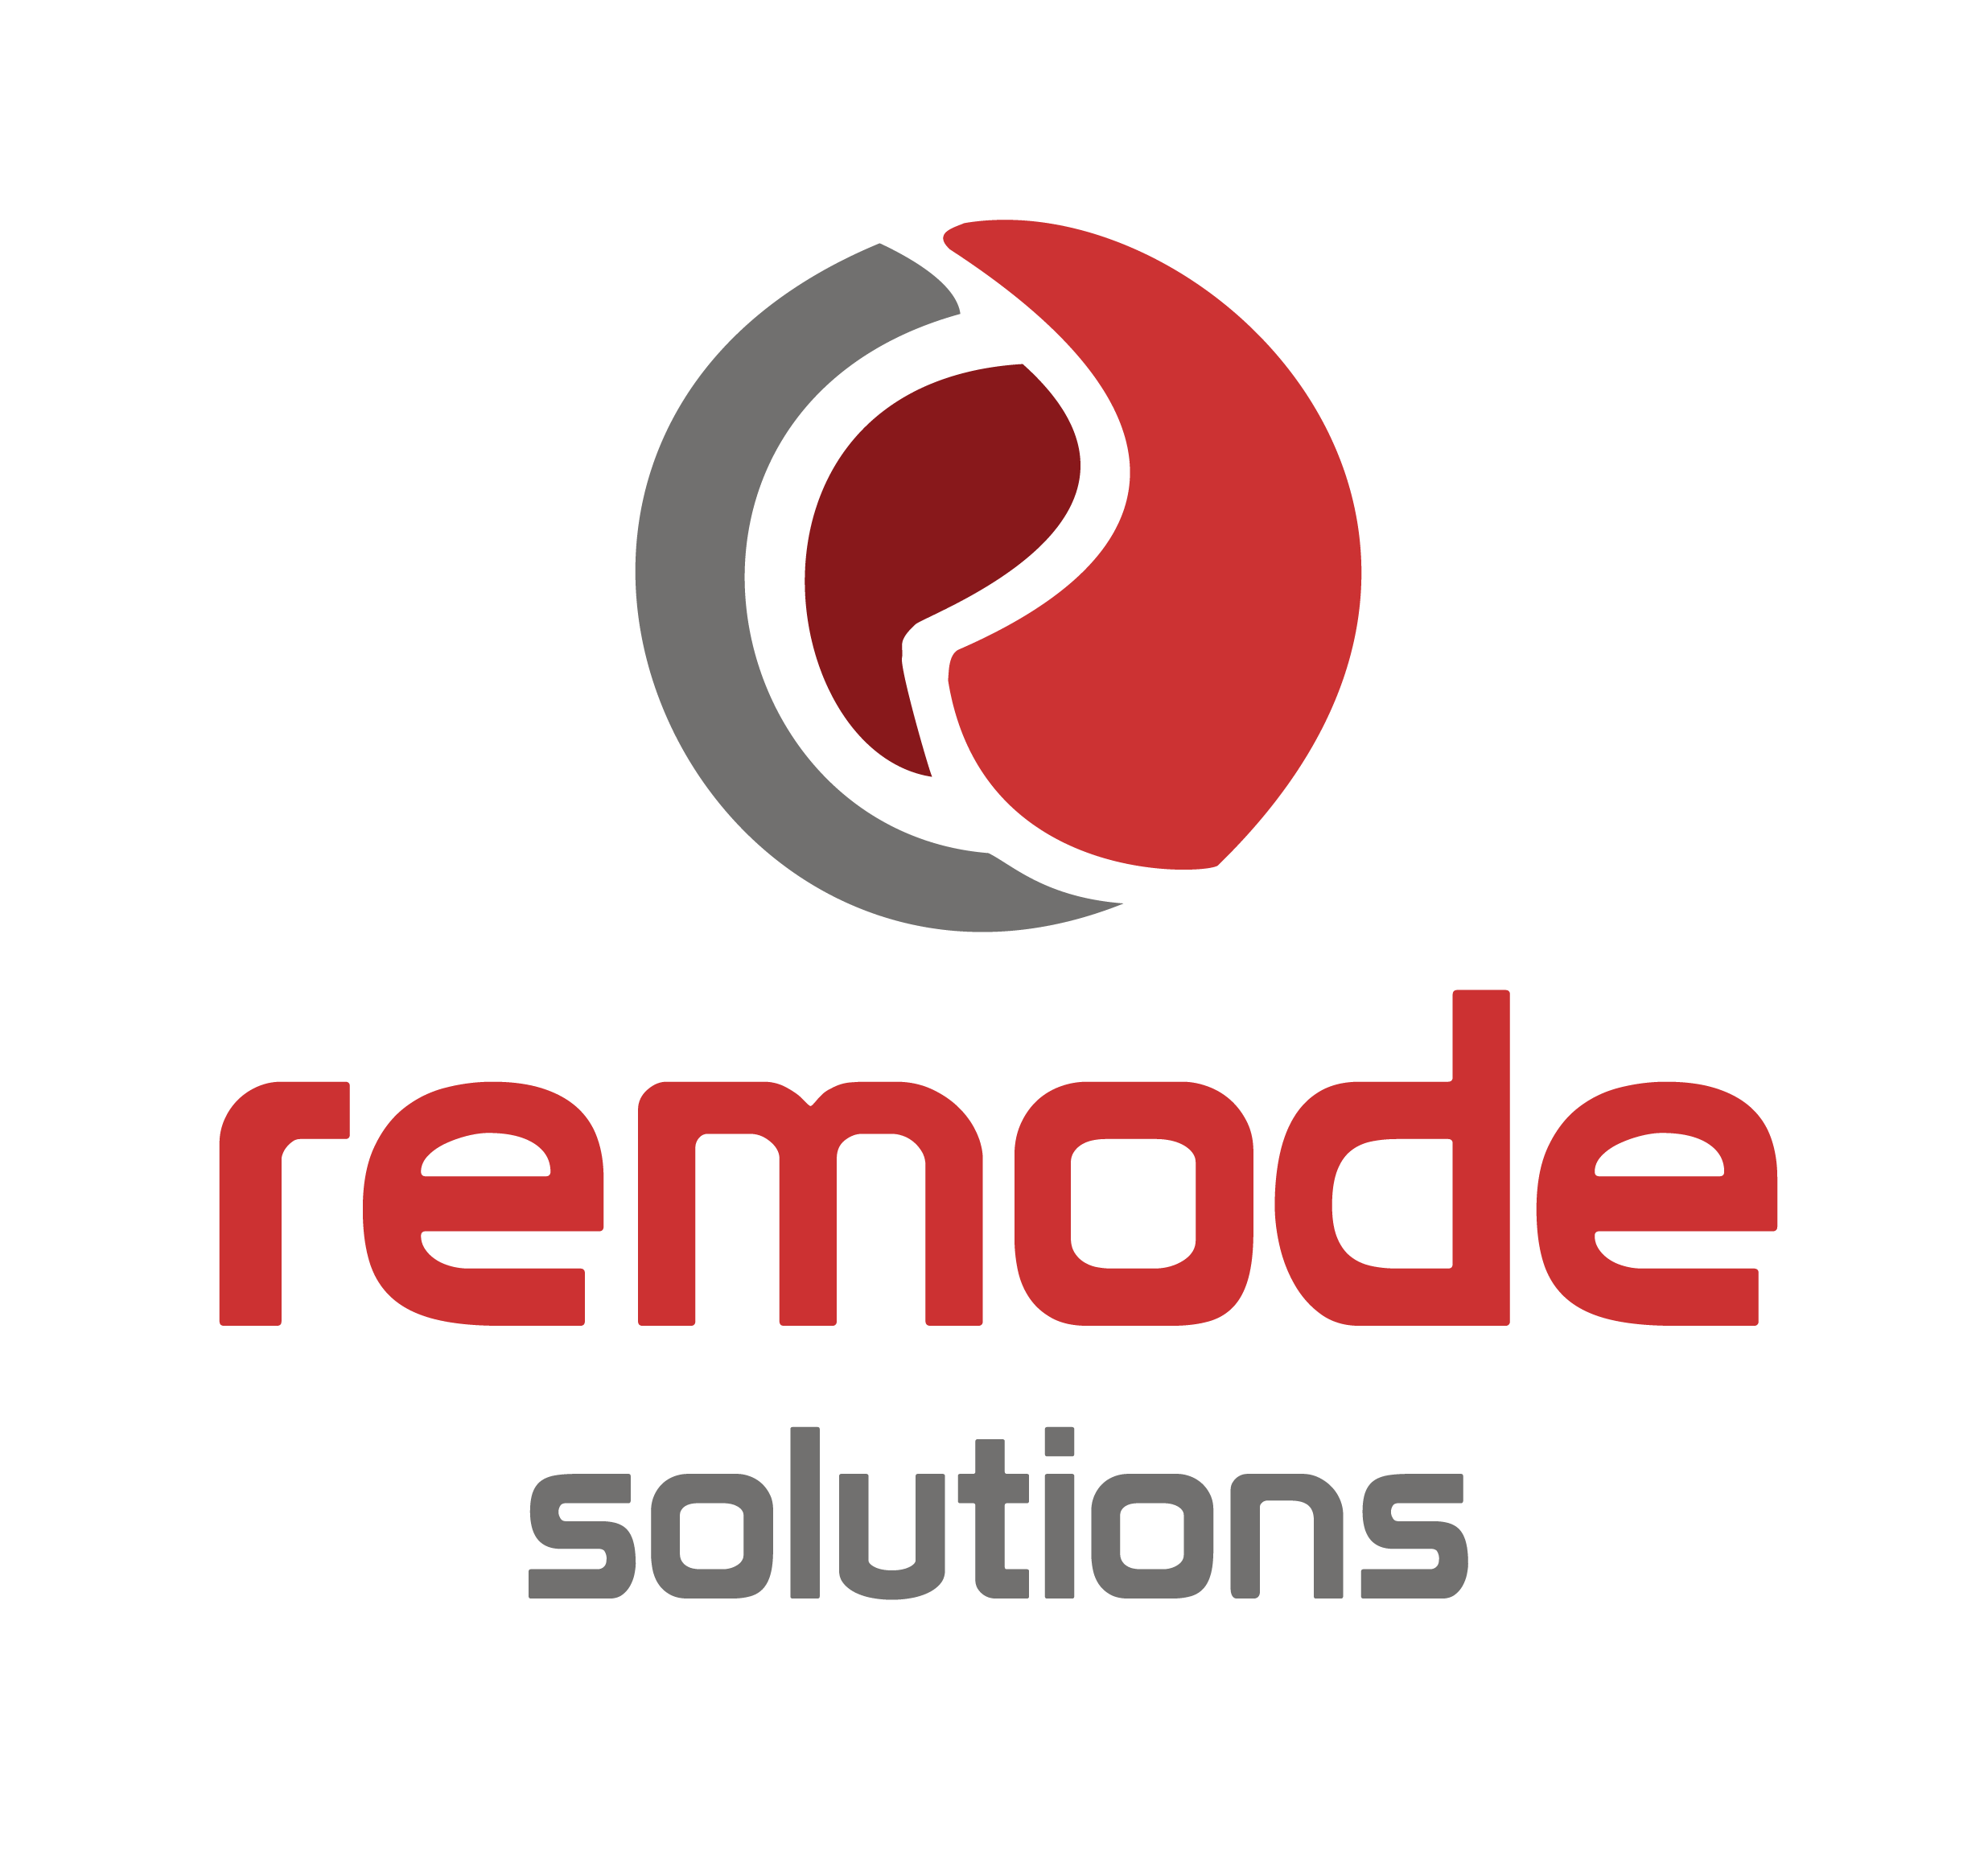 Remode Solutions